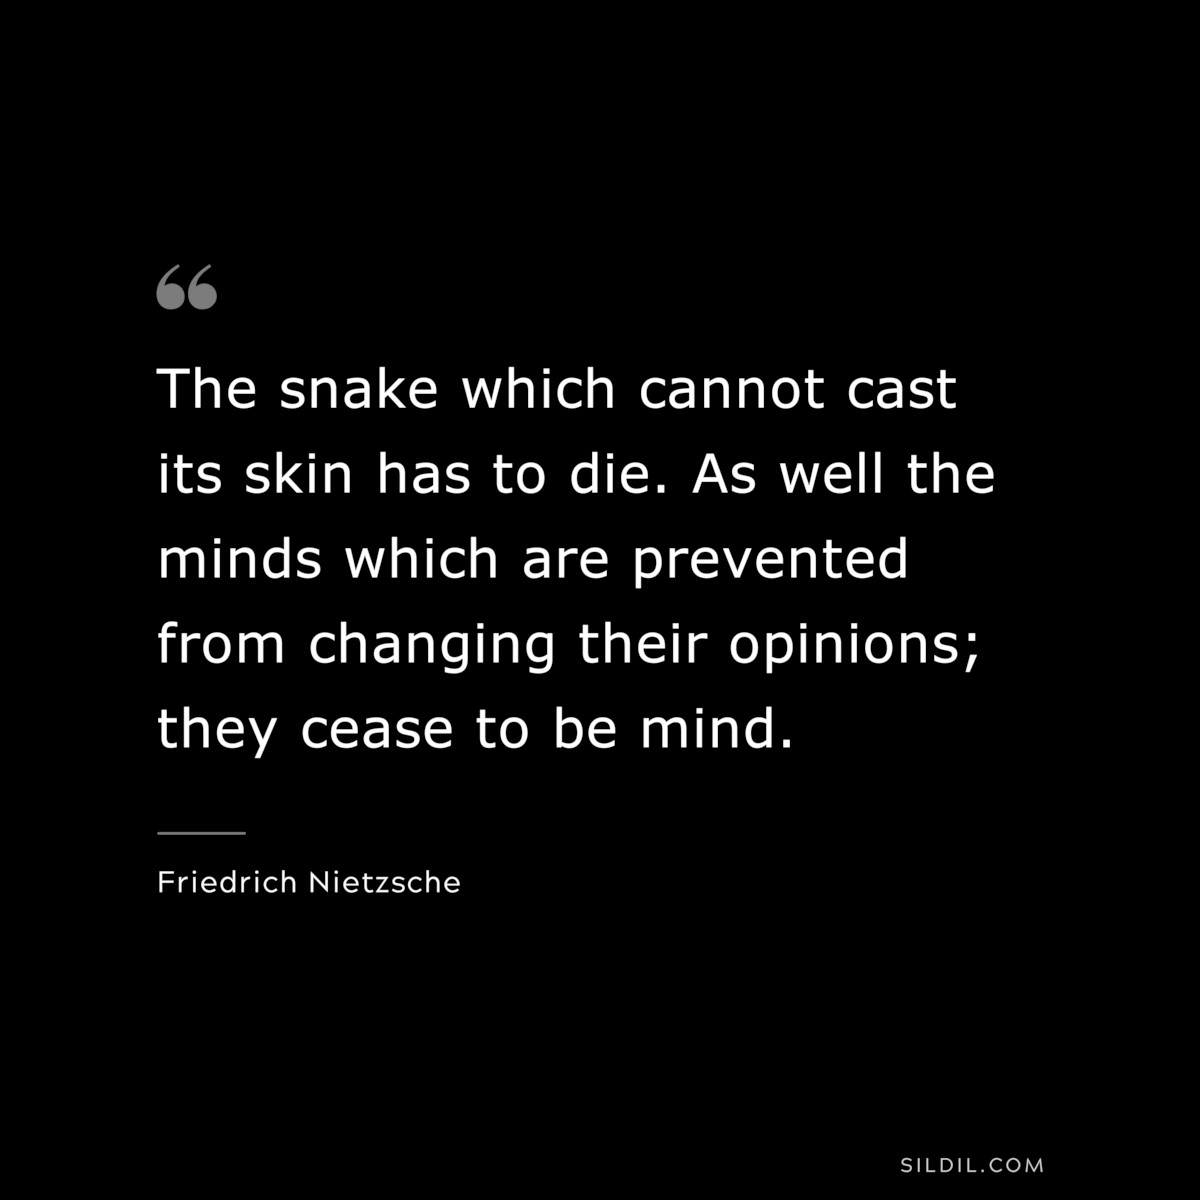 The snake which cannot cast its skin has to die. As well the minds which are prevented from changing their opinions; they cease to be mind. ― Friedrich Nietzsche